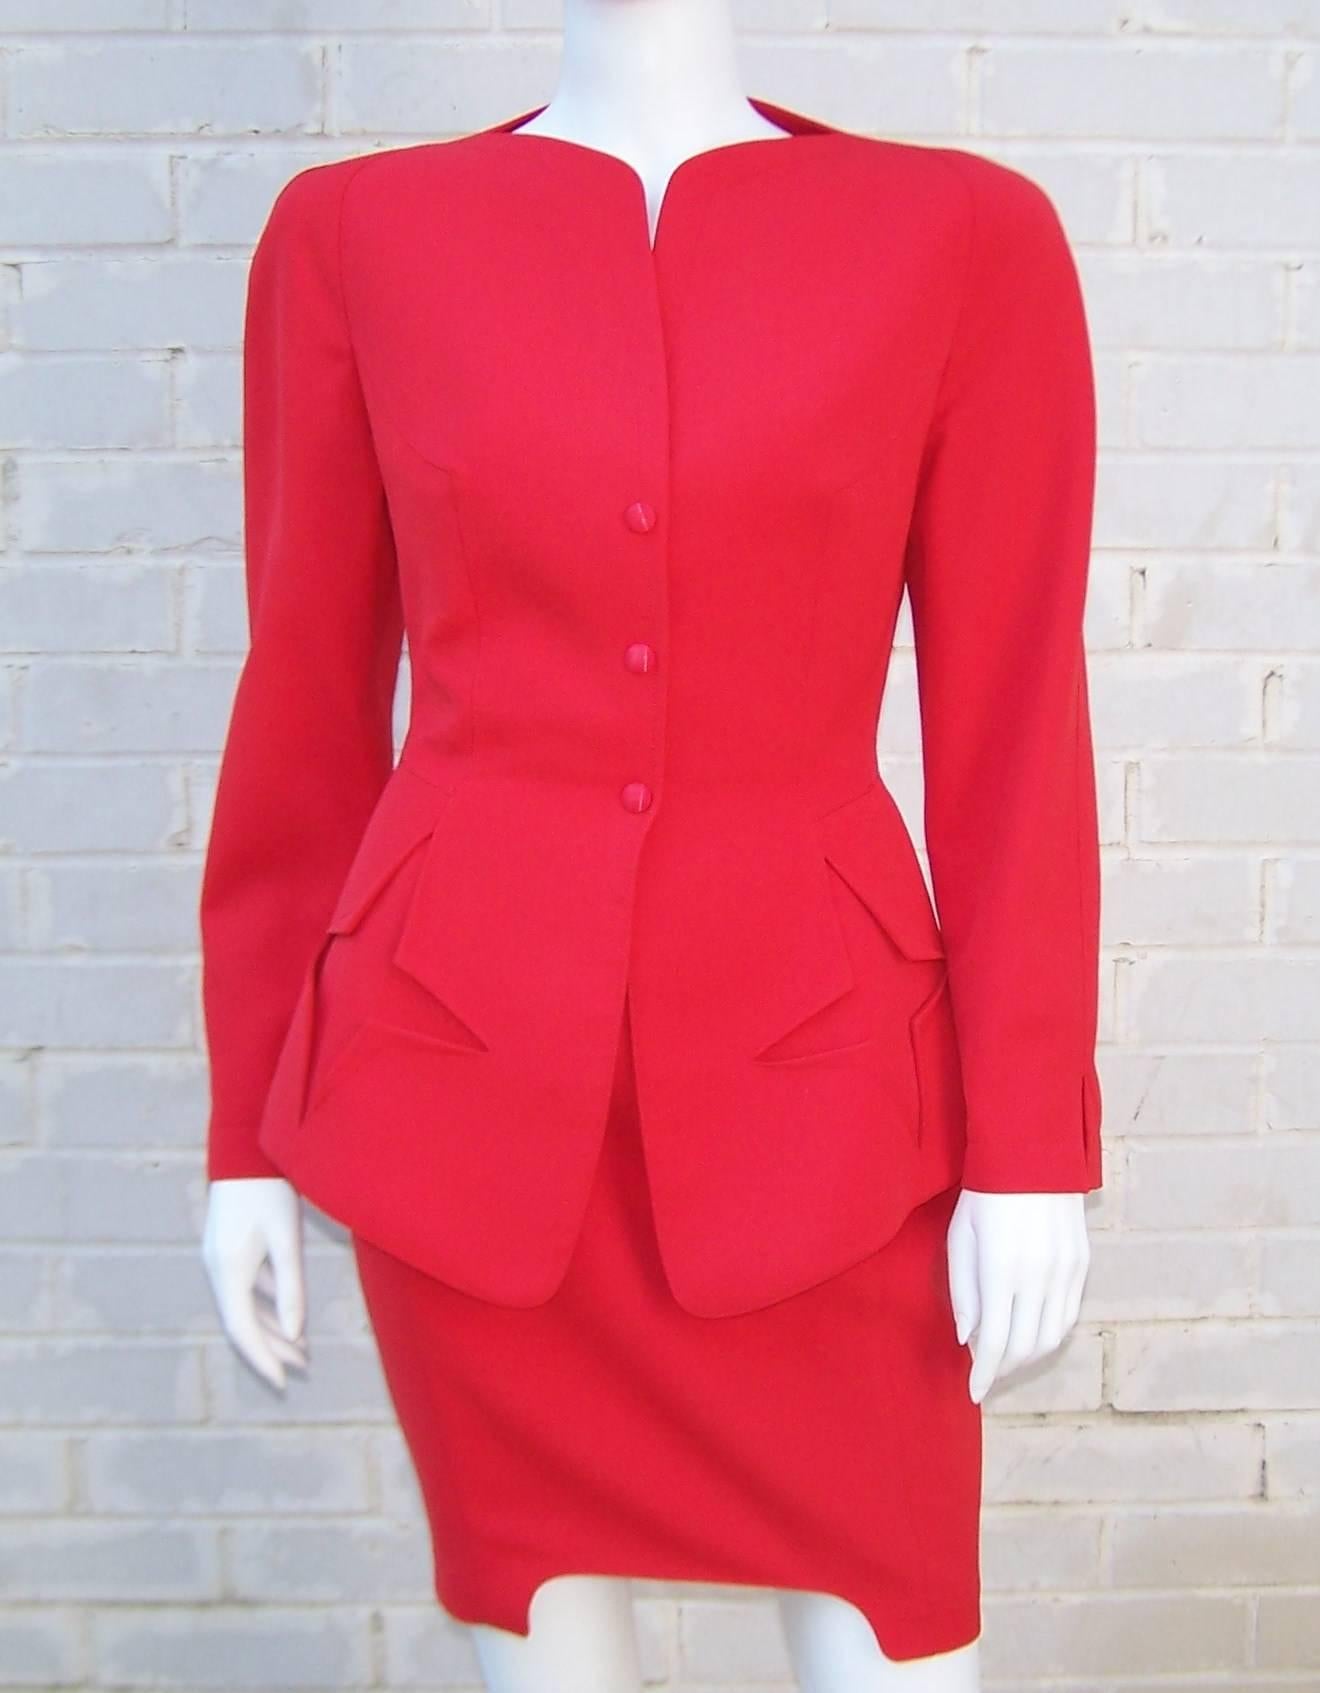 Stop traffic in this futuristic fiery red Thierry Mugler 2-piece suit.  As with all Mr. Mugler's designs, the details are endless and full of imagination.  The jacket fits snuggly in the torso and then flares out to reveal pockets shaped like